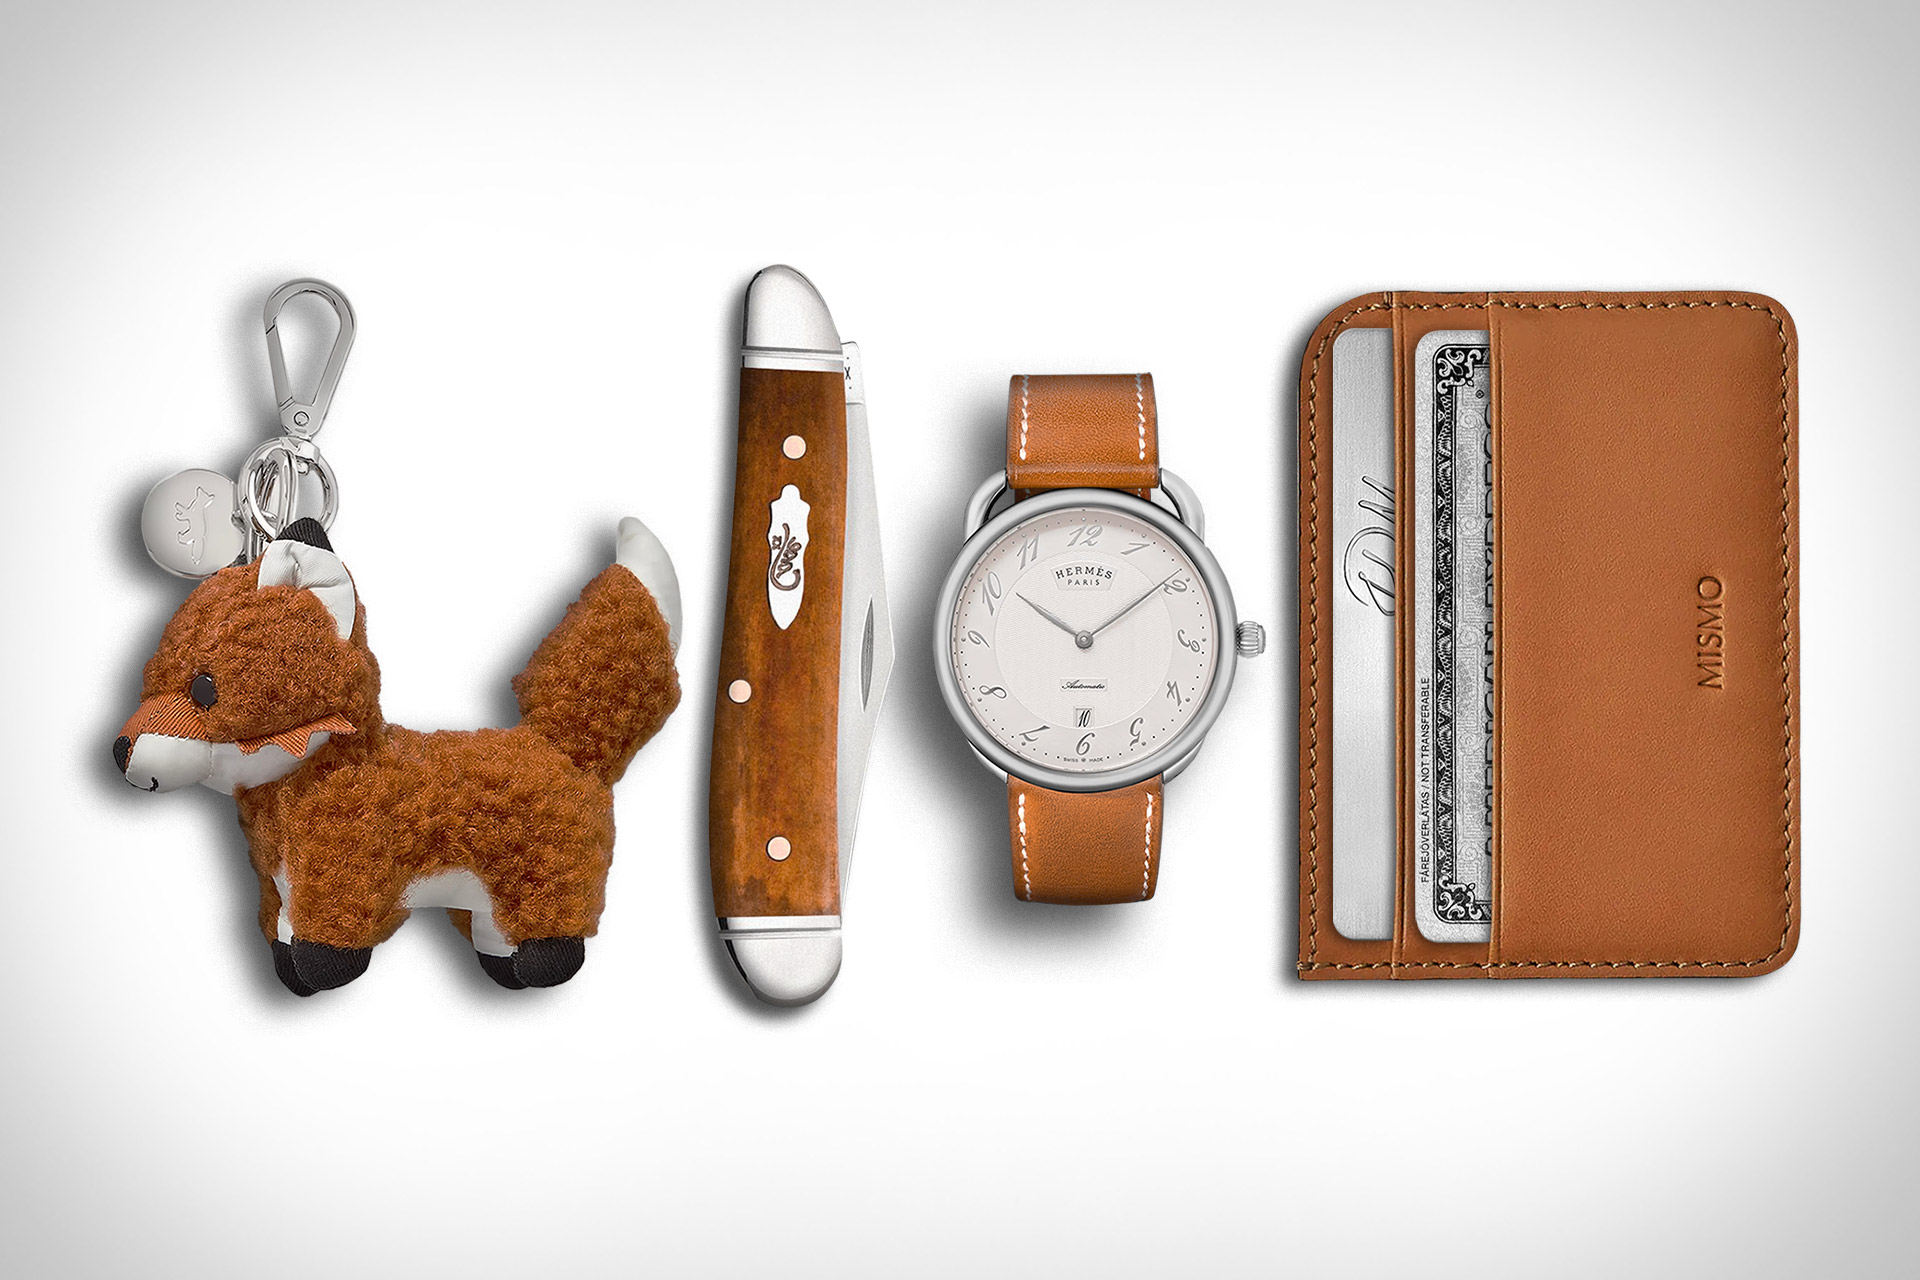 Everyday Carry: Fox | Uncrate, #Everyday #Carry #Fox #Uncrate